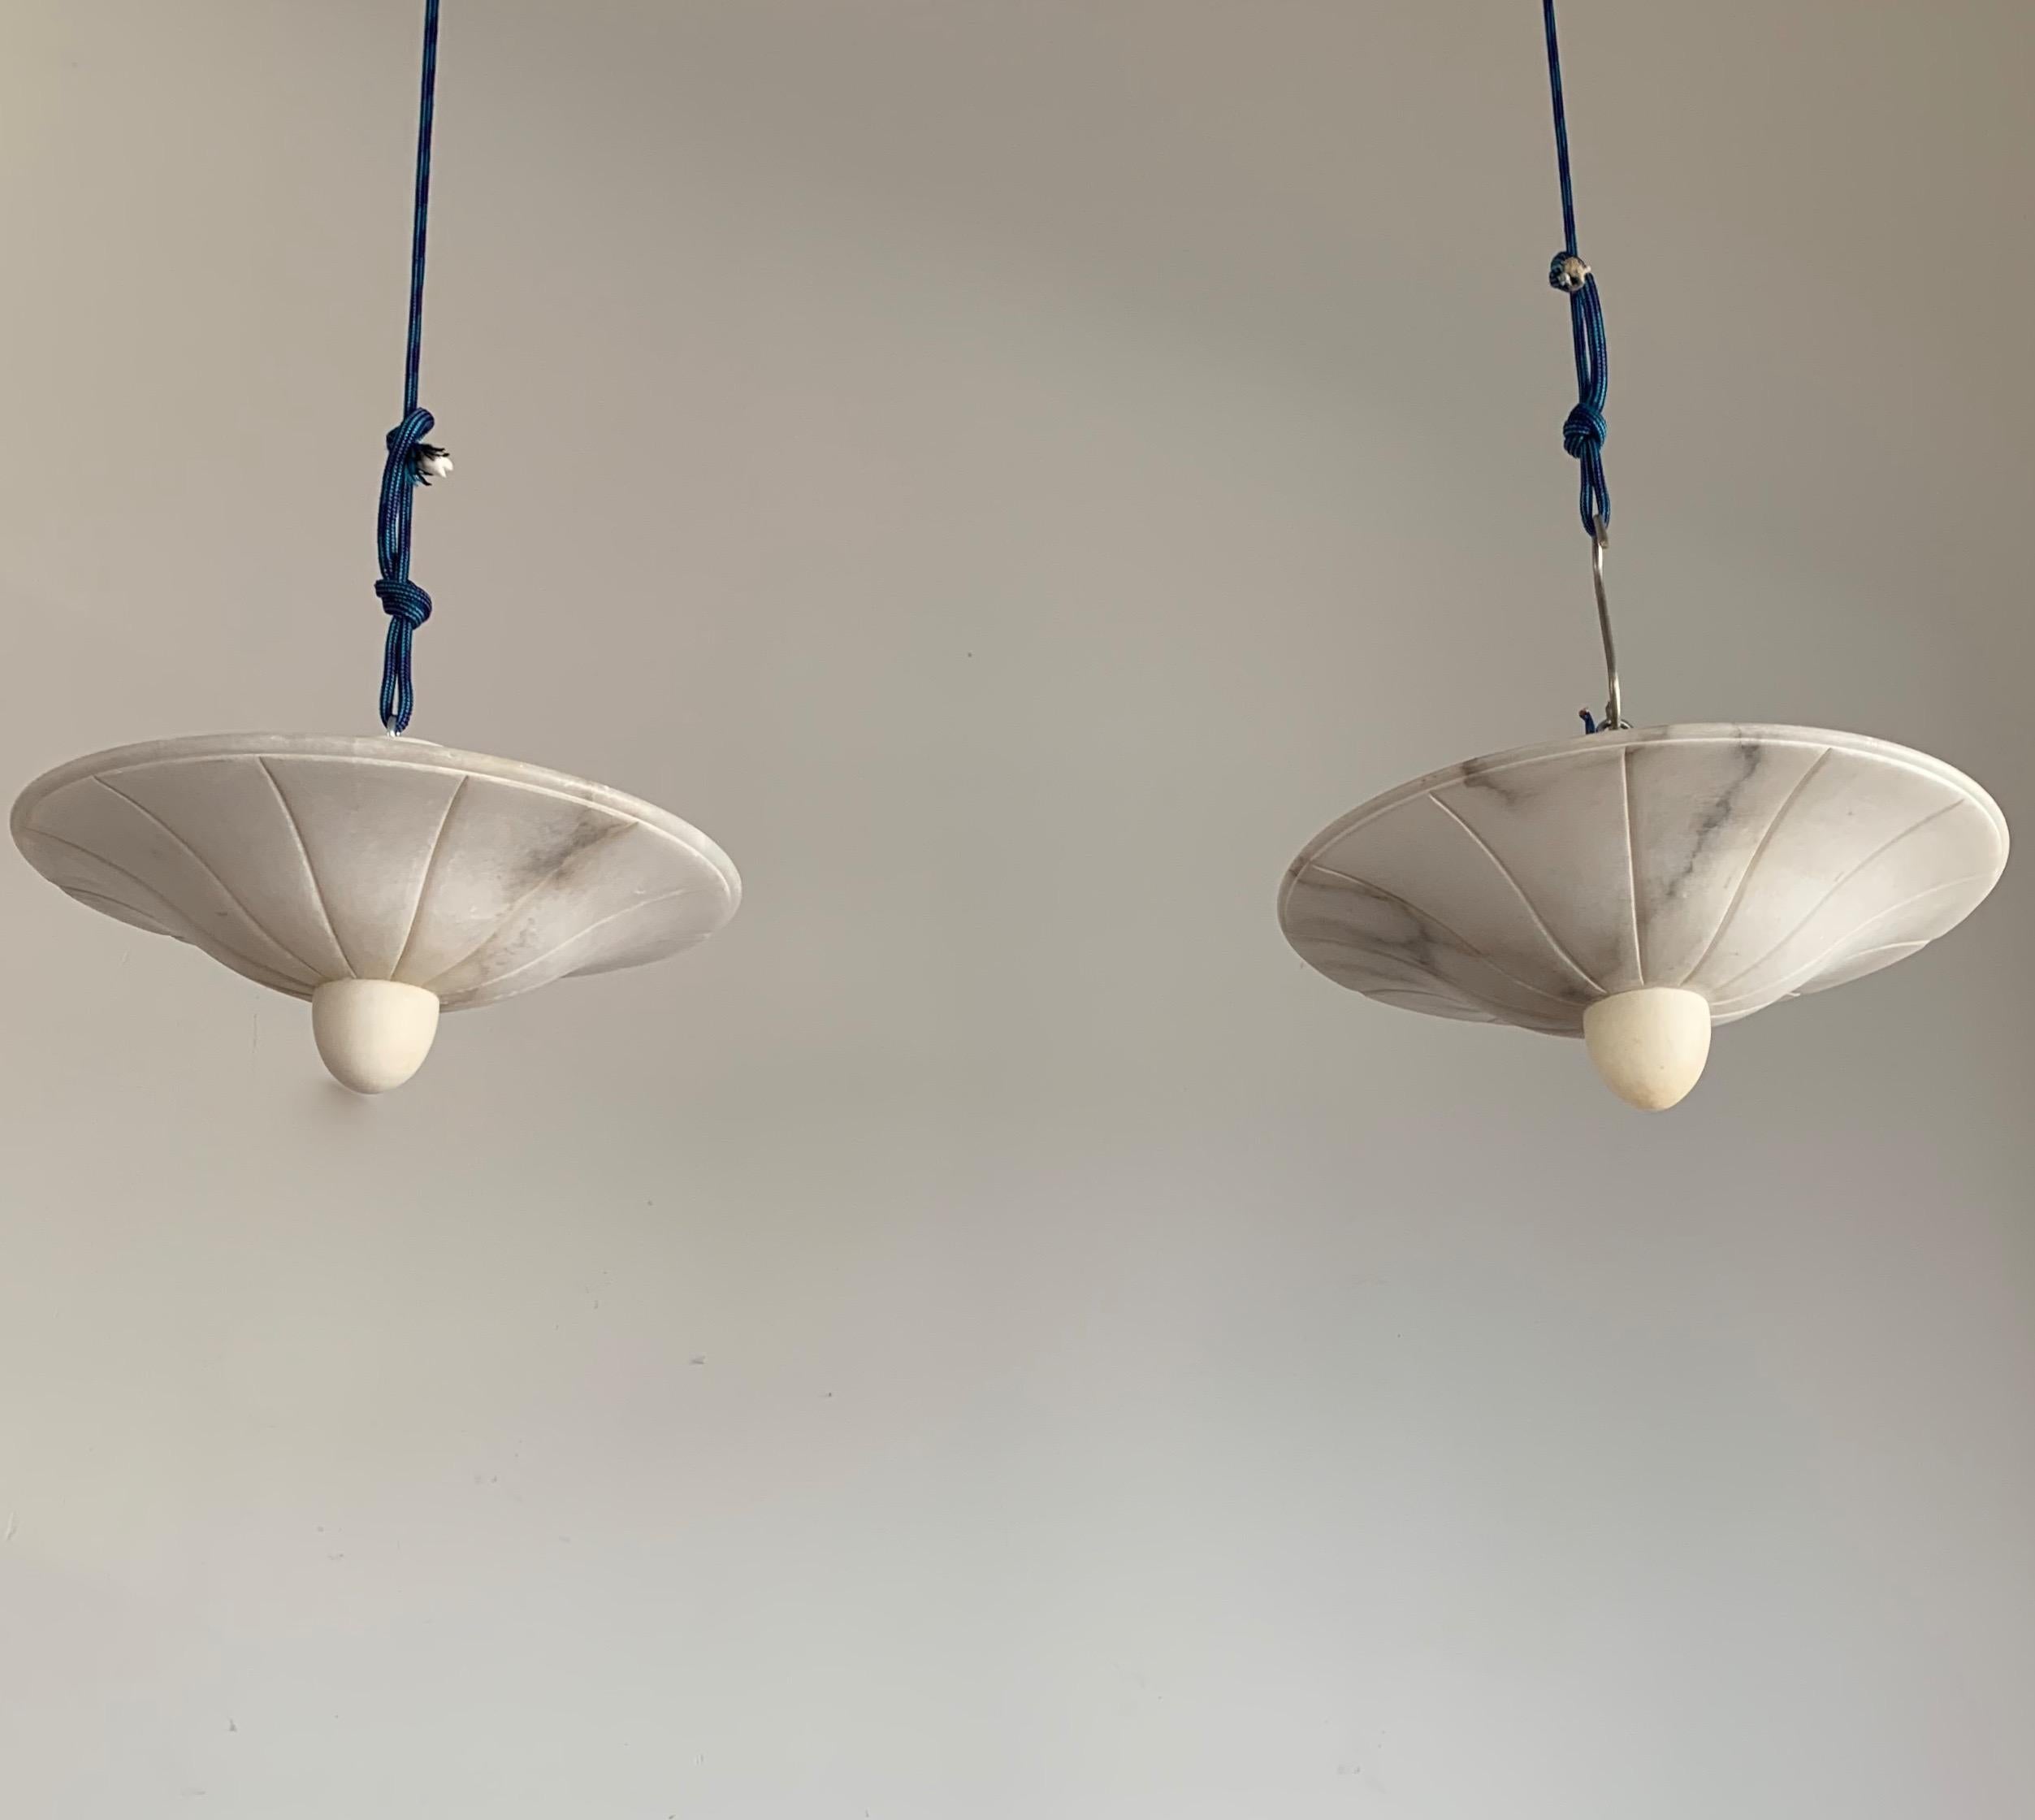 Very rare design and good size alabaster flush mounts.

This identical pair of excellent quality and superb condition flush mounts could be your perfect lighting solution. This is the first time that we have ever seen this striking design and for